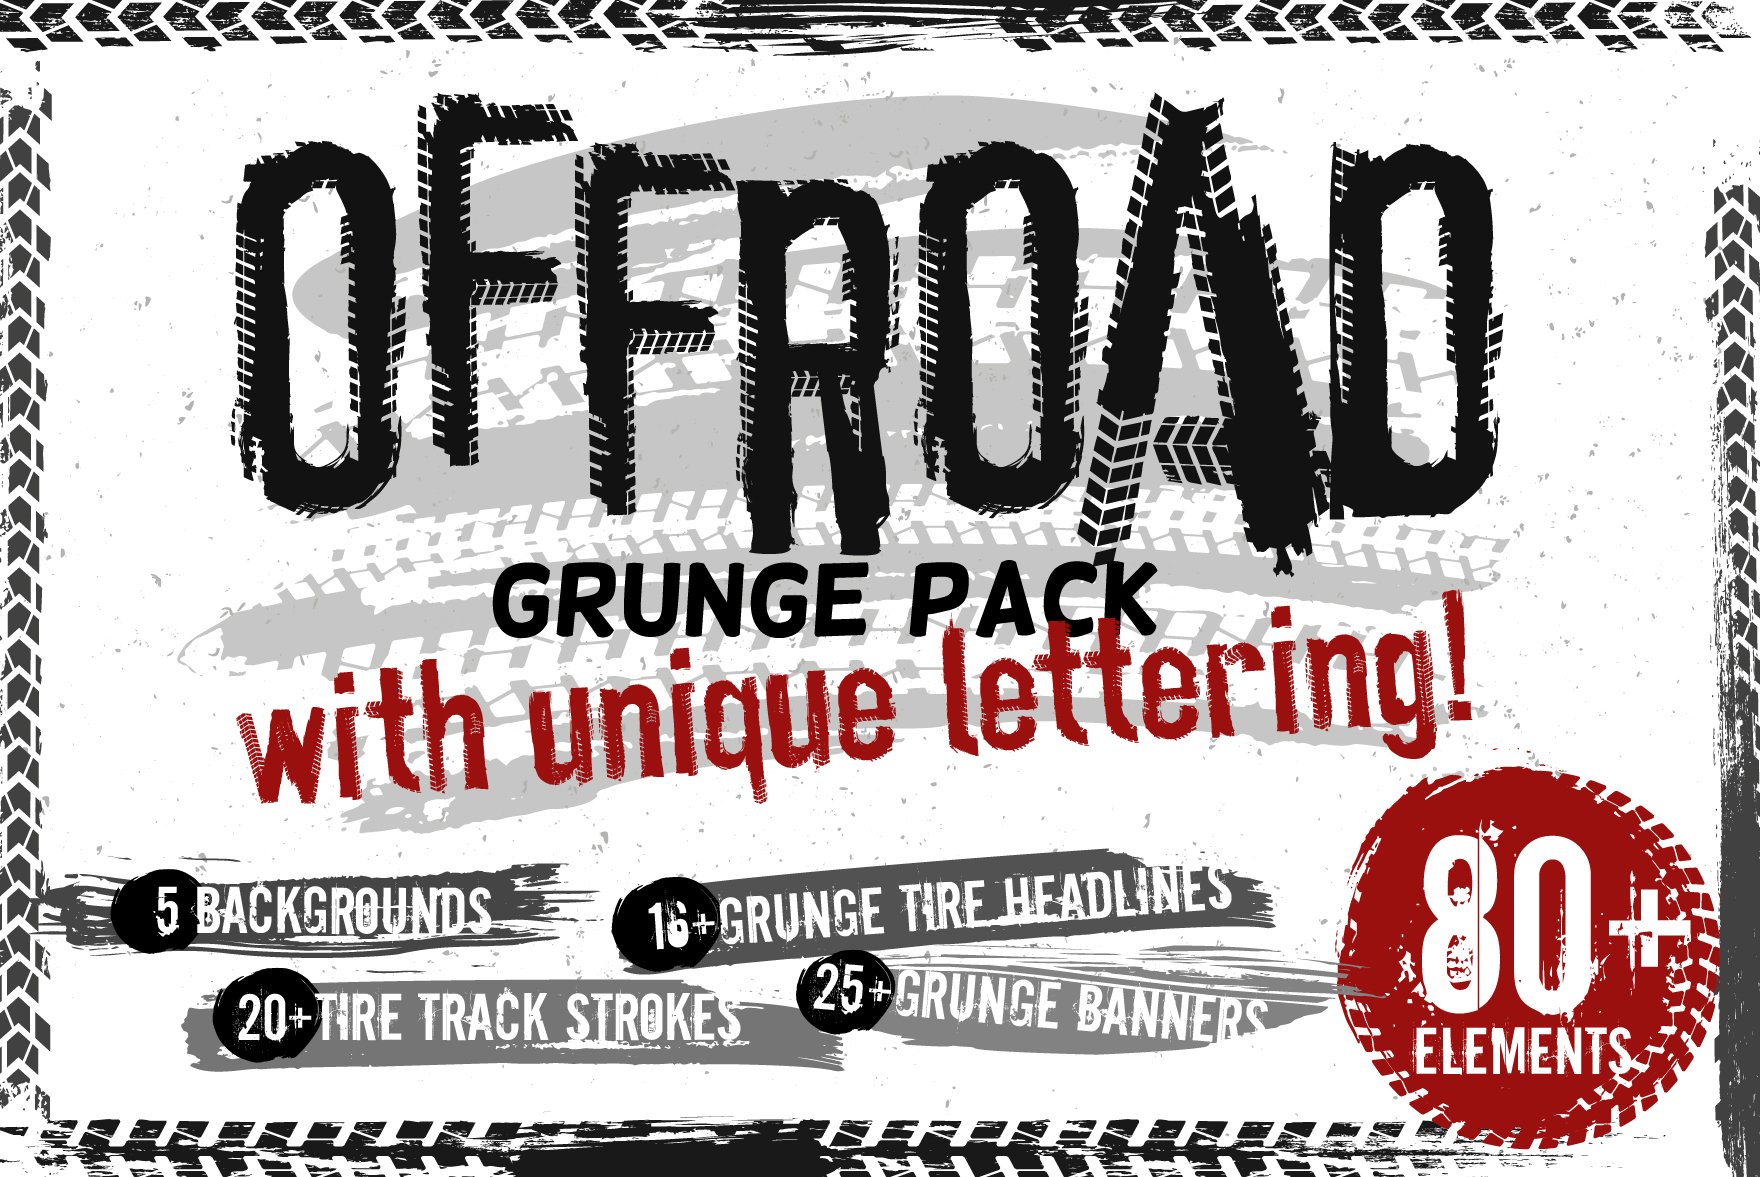 Off-Road Grunge Pack cover image.